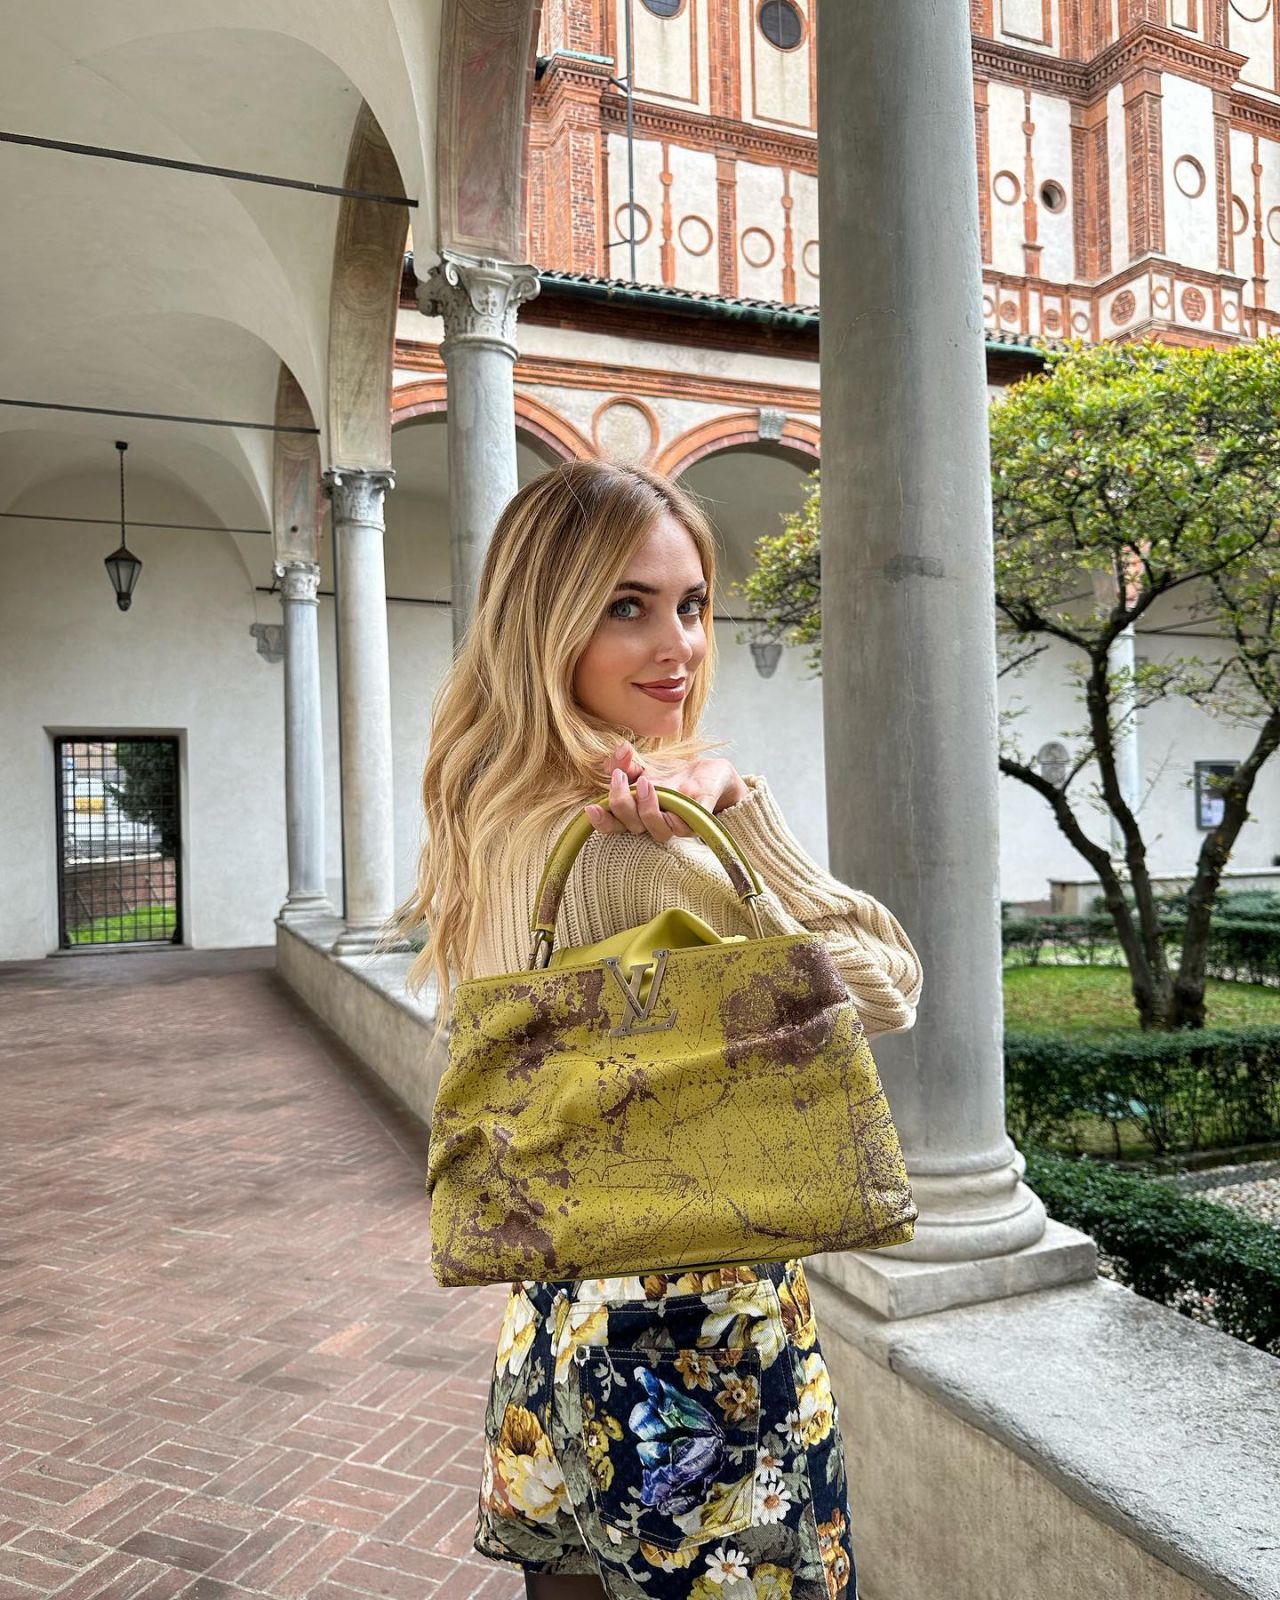 Chiara Ferragni ✨ on Instagram: “Look of the day 💖 Wearing one of the new  colorful Capucines bag by @louisvu…